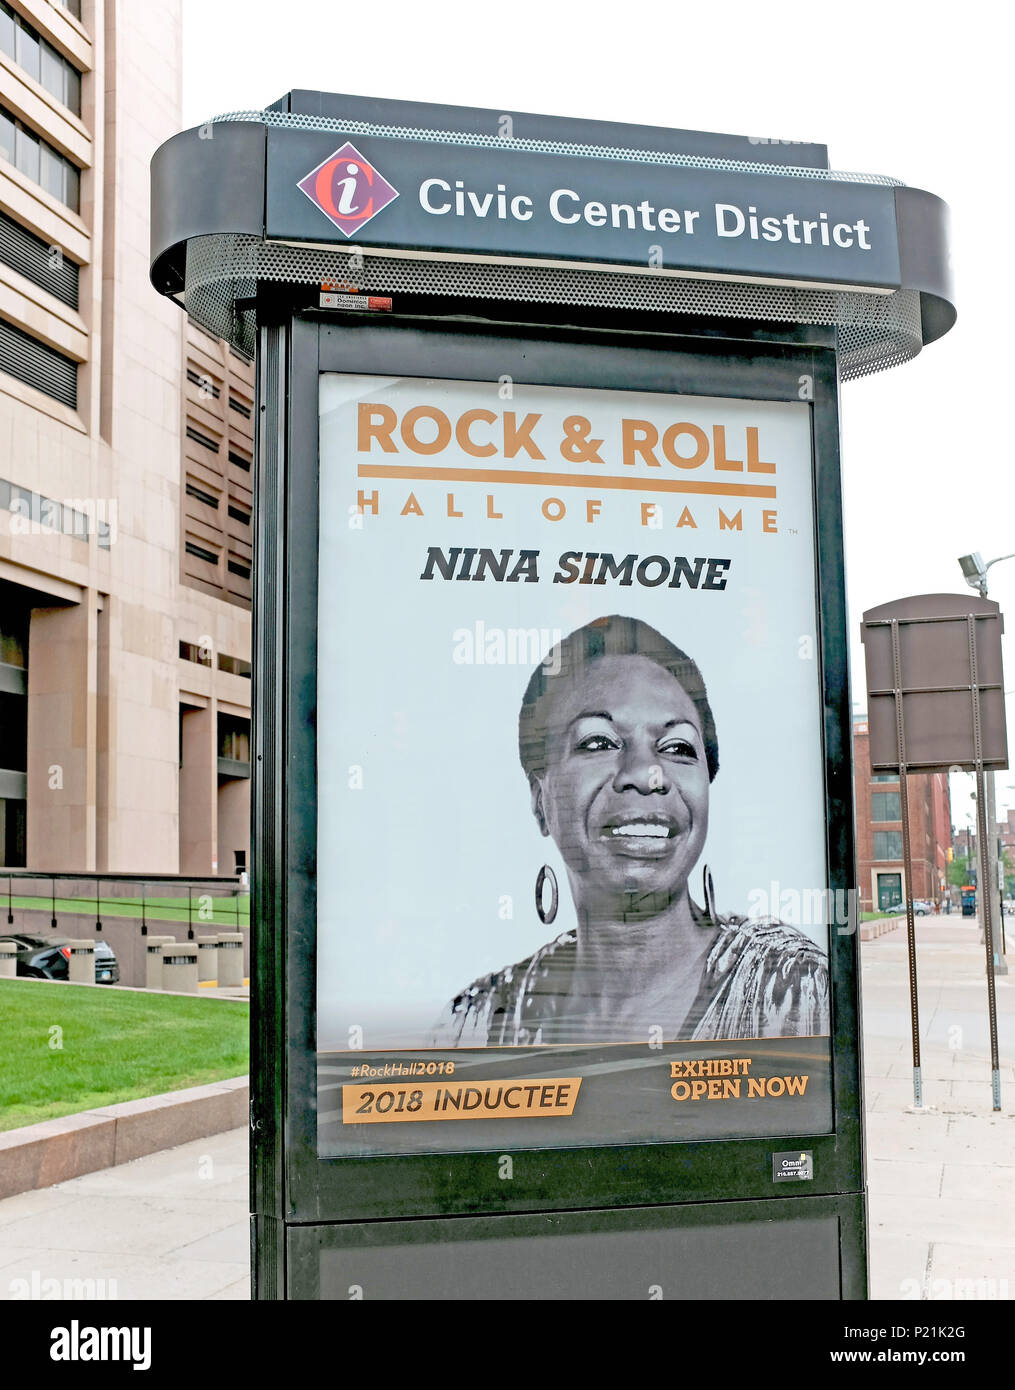 A poster of Nina Simone, Rock and Roll Hall of Fame inductee, hangs in a sidewalk marquee in the CIvic Center District of downtown Cleveland, Ohio. Stock Photo